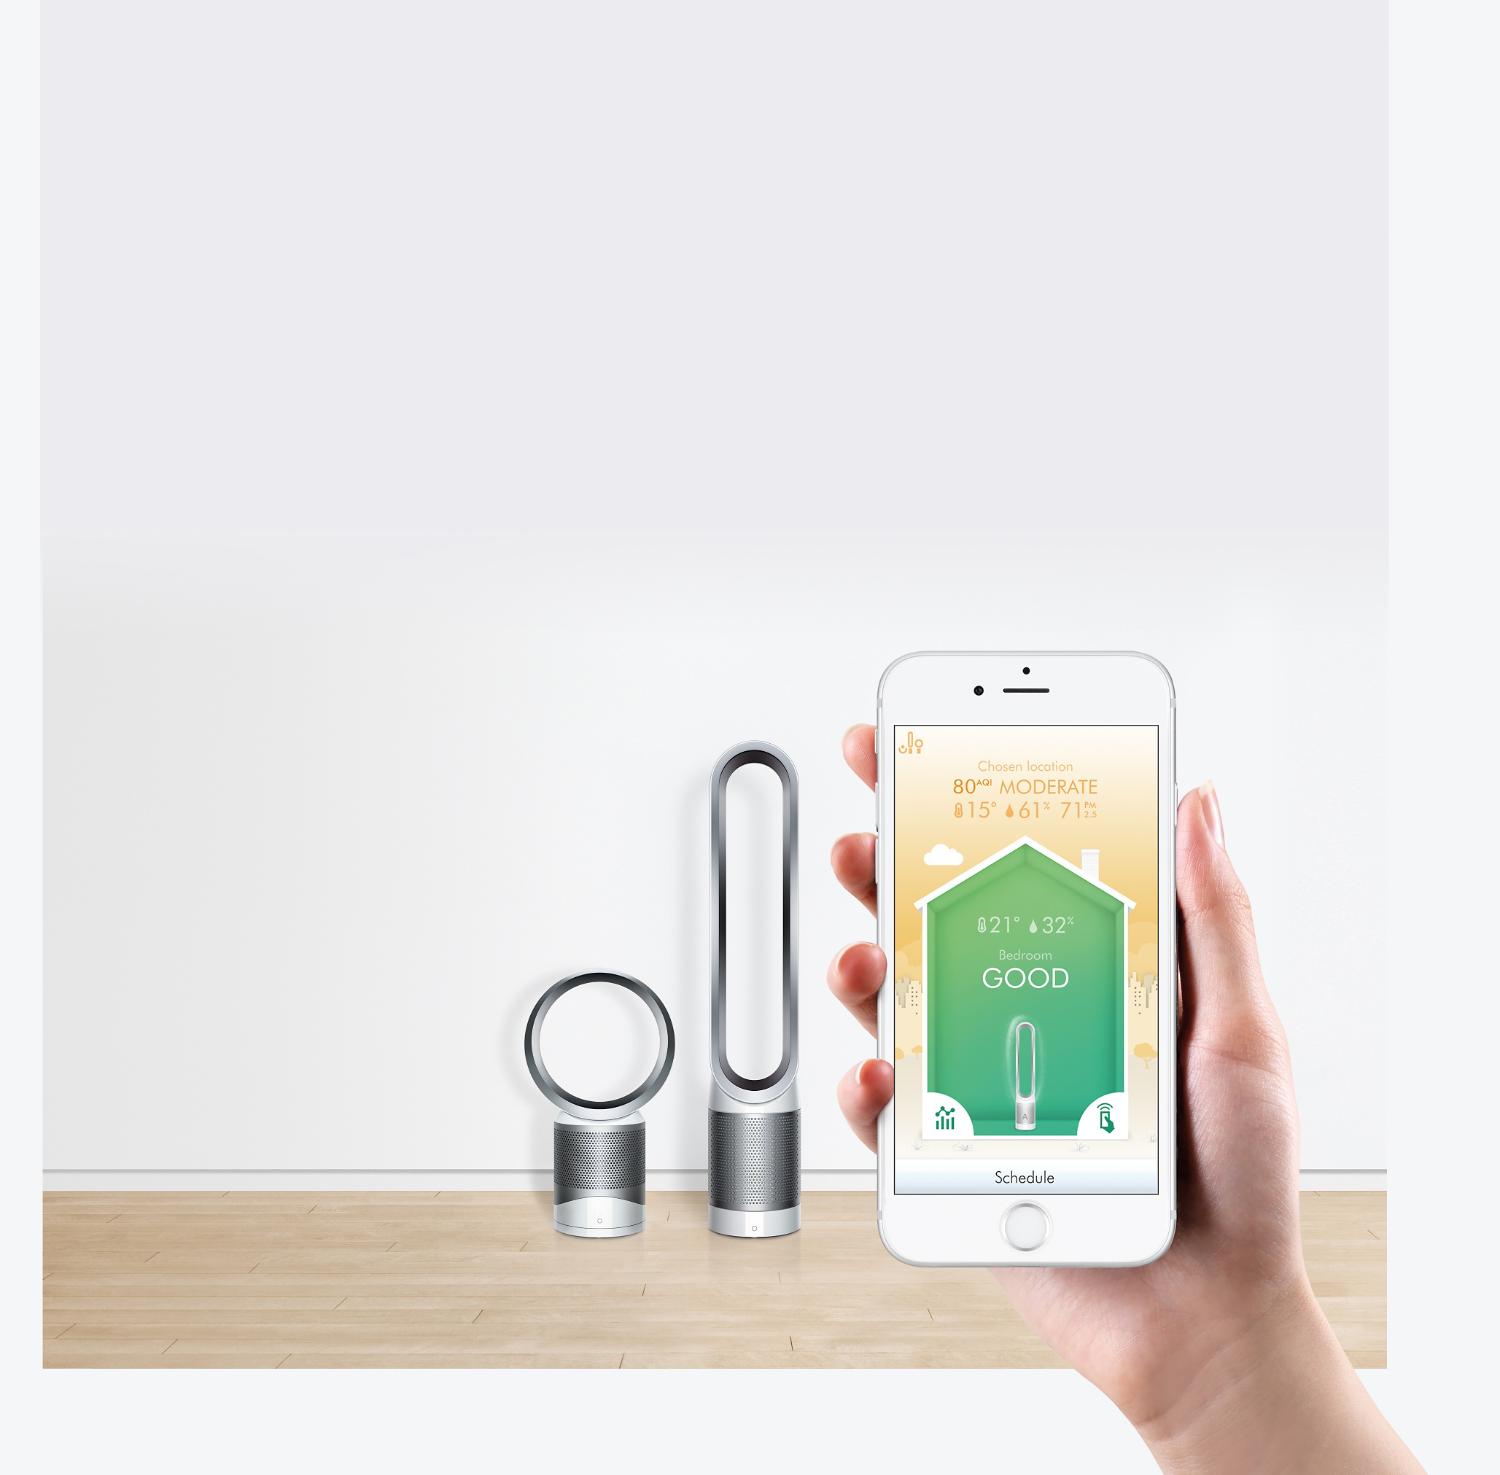 dyson link app dyson new zealand pure cool linkᵀᴹ air purifiers dyson new zealand